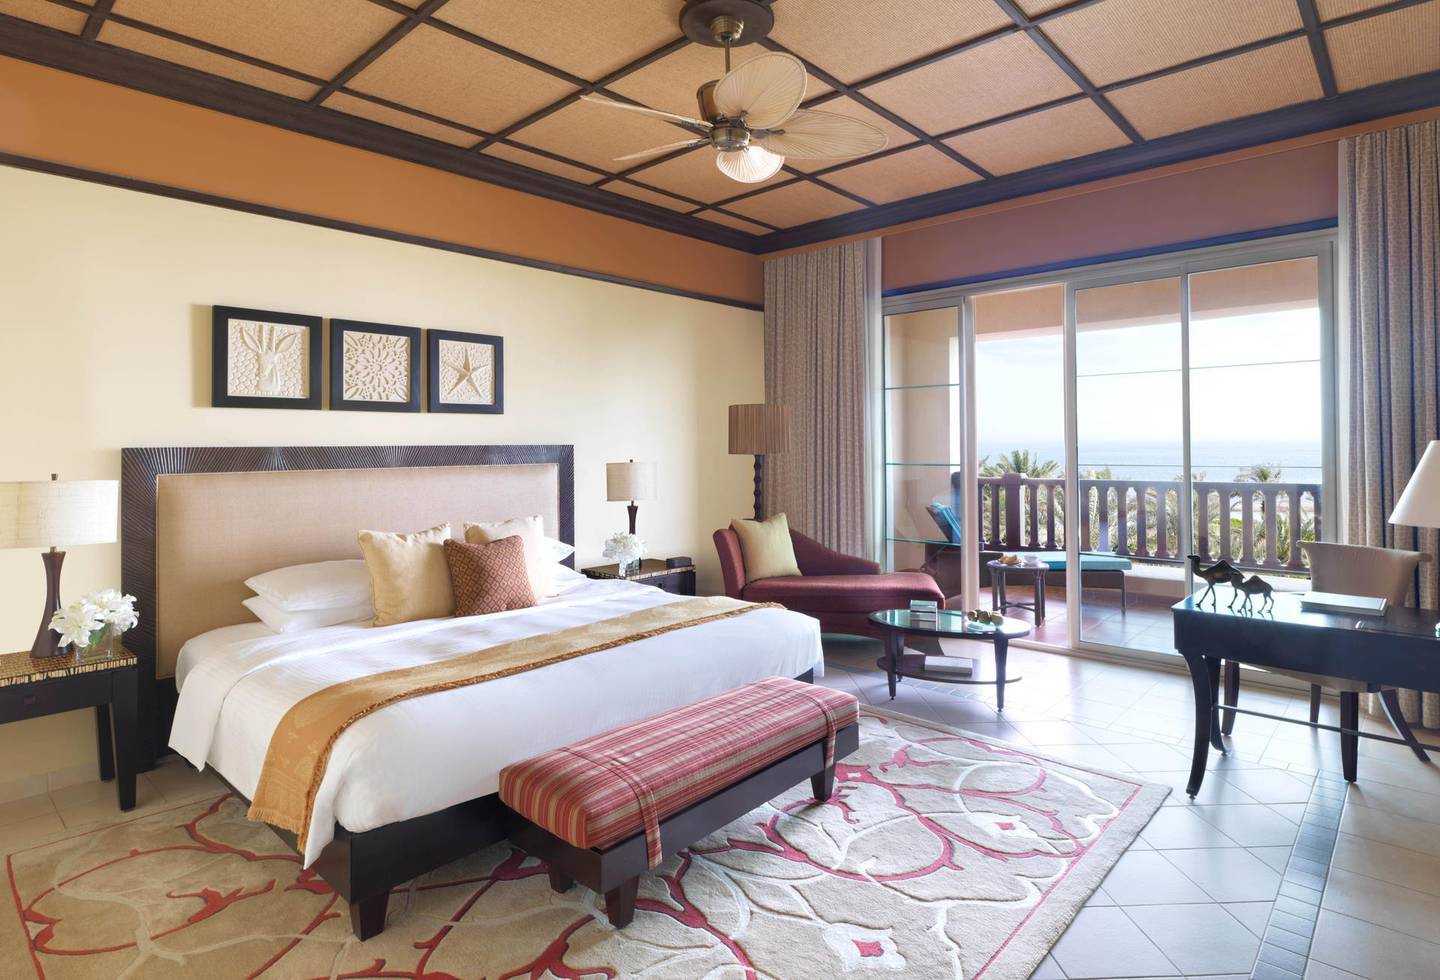 Rooms are spacious and offer views overlooking the pool and the beach